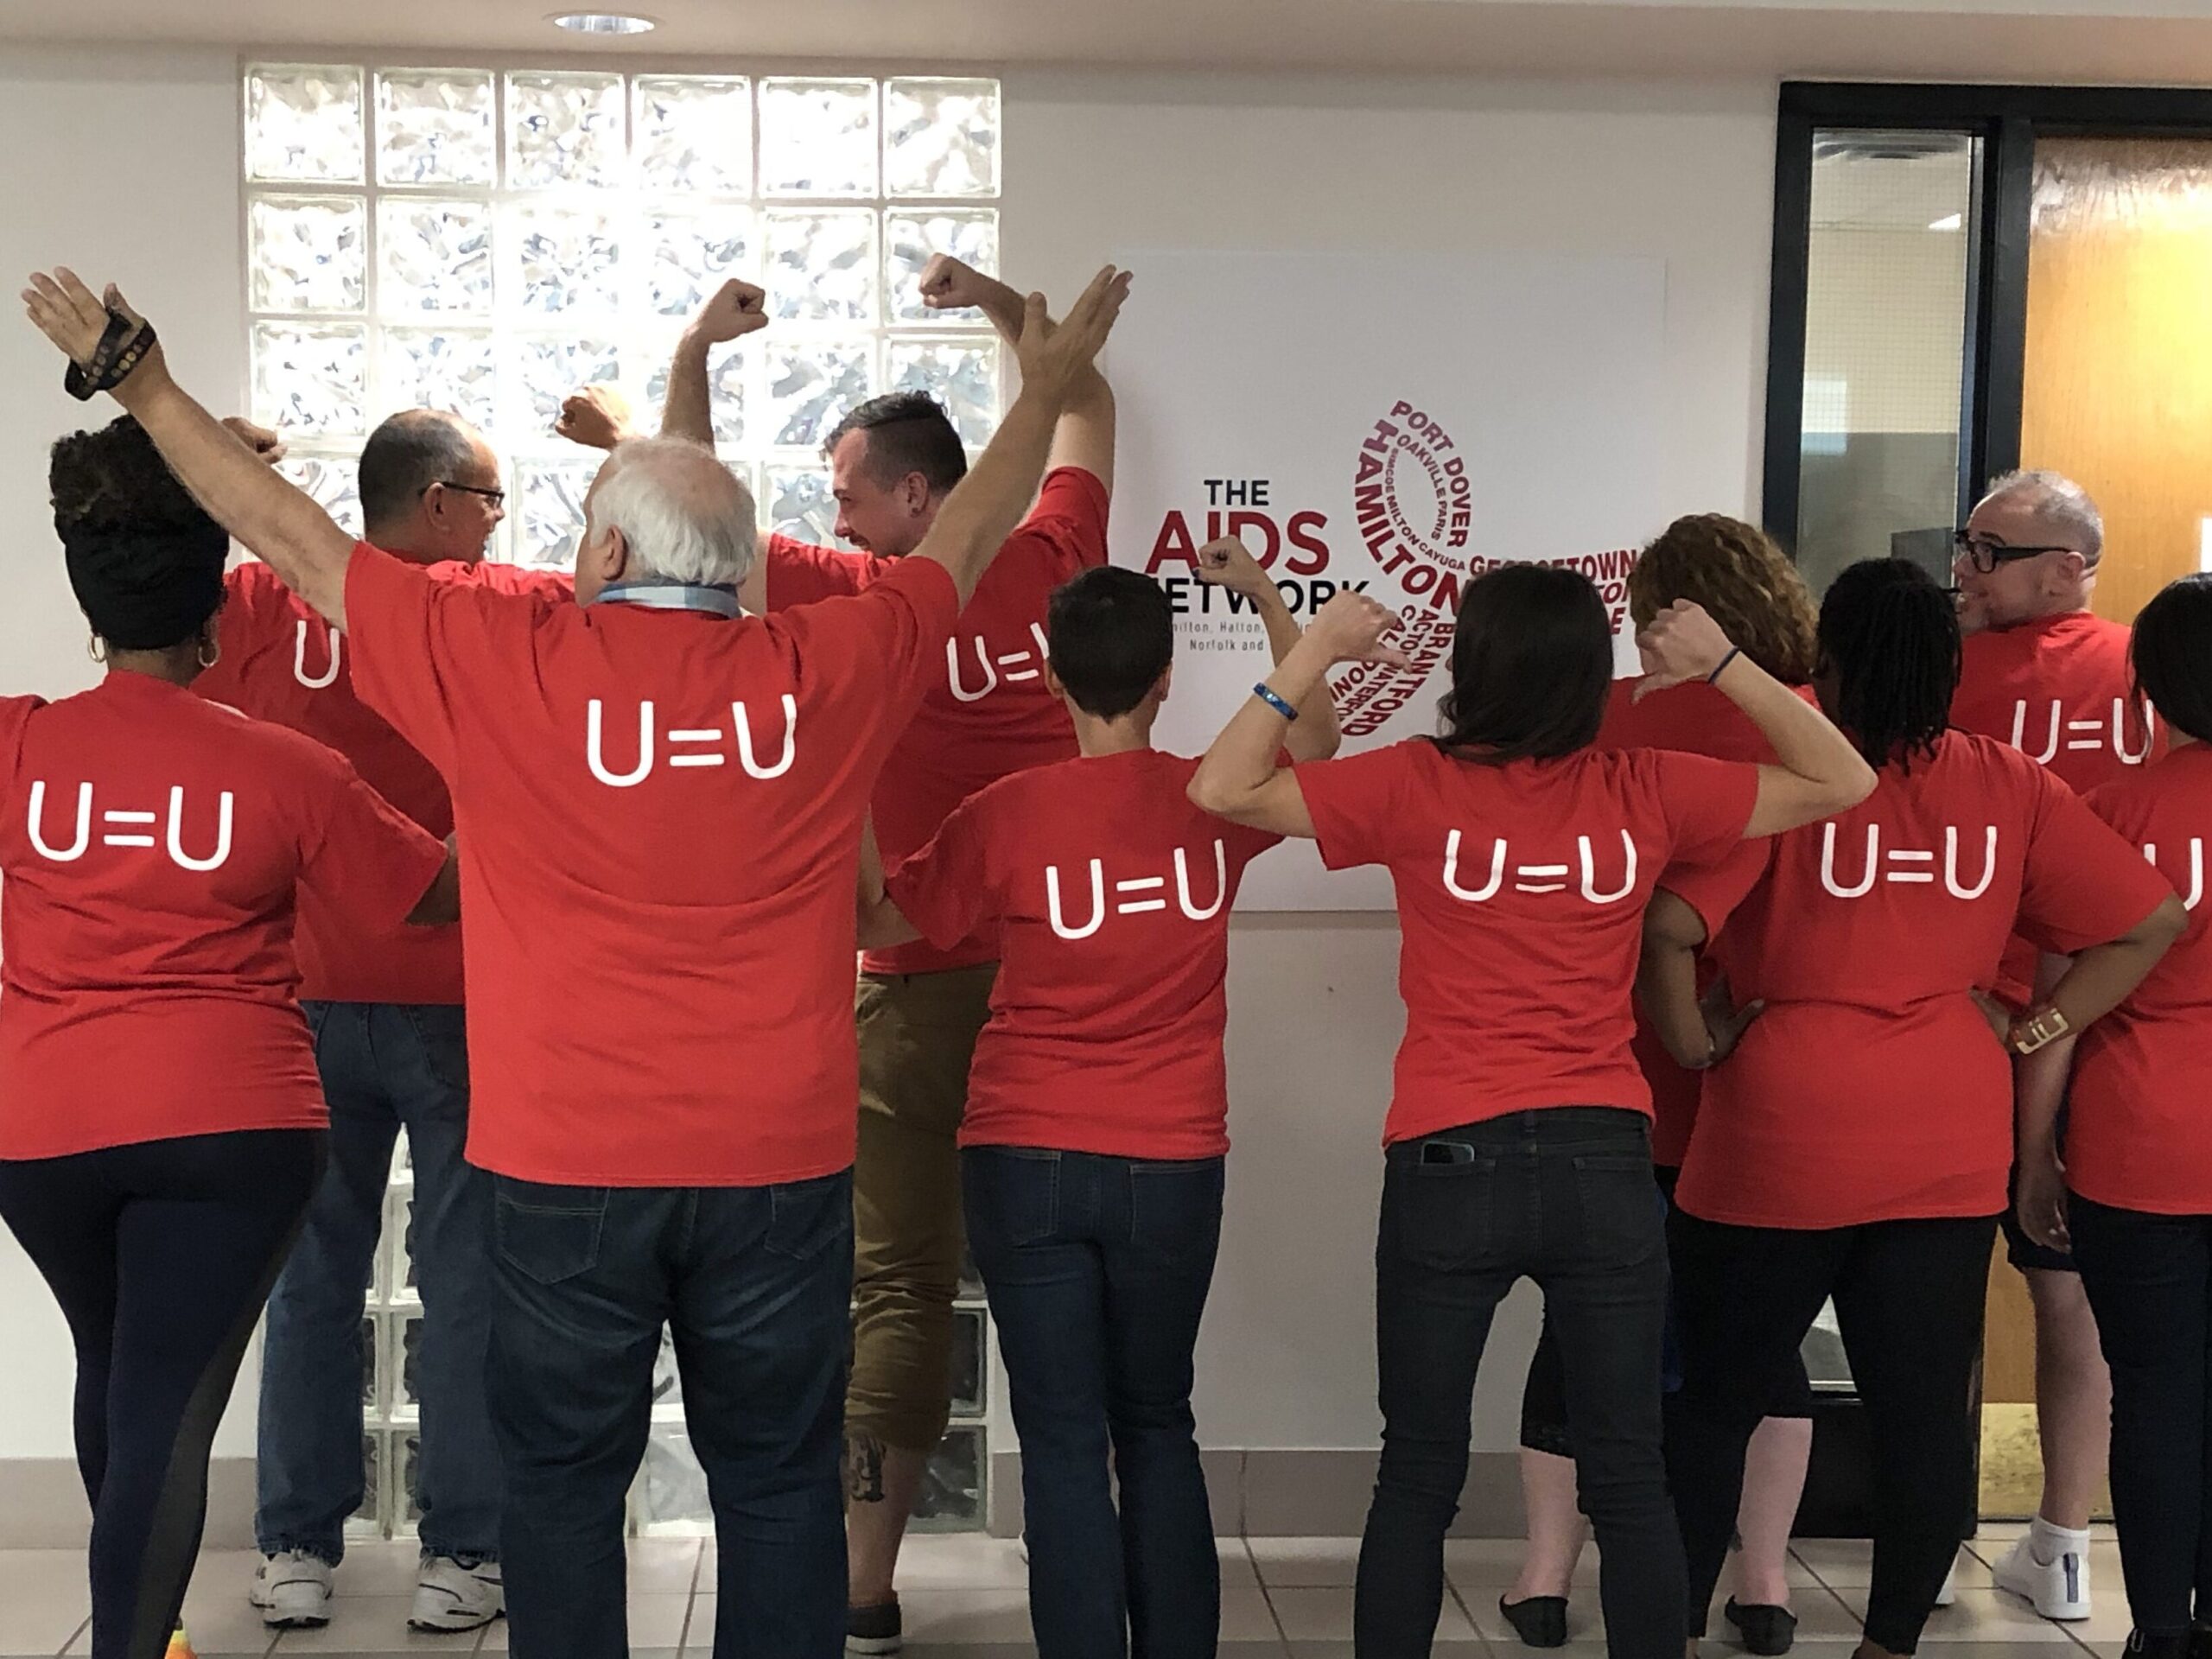 The Positive Health Network's staff showing off their 'U=U' shirts.